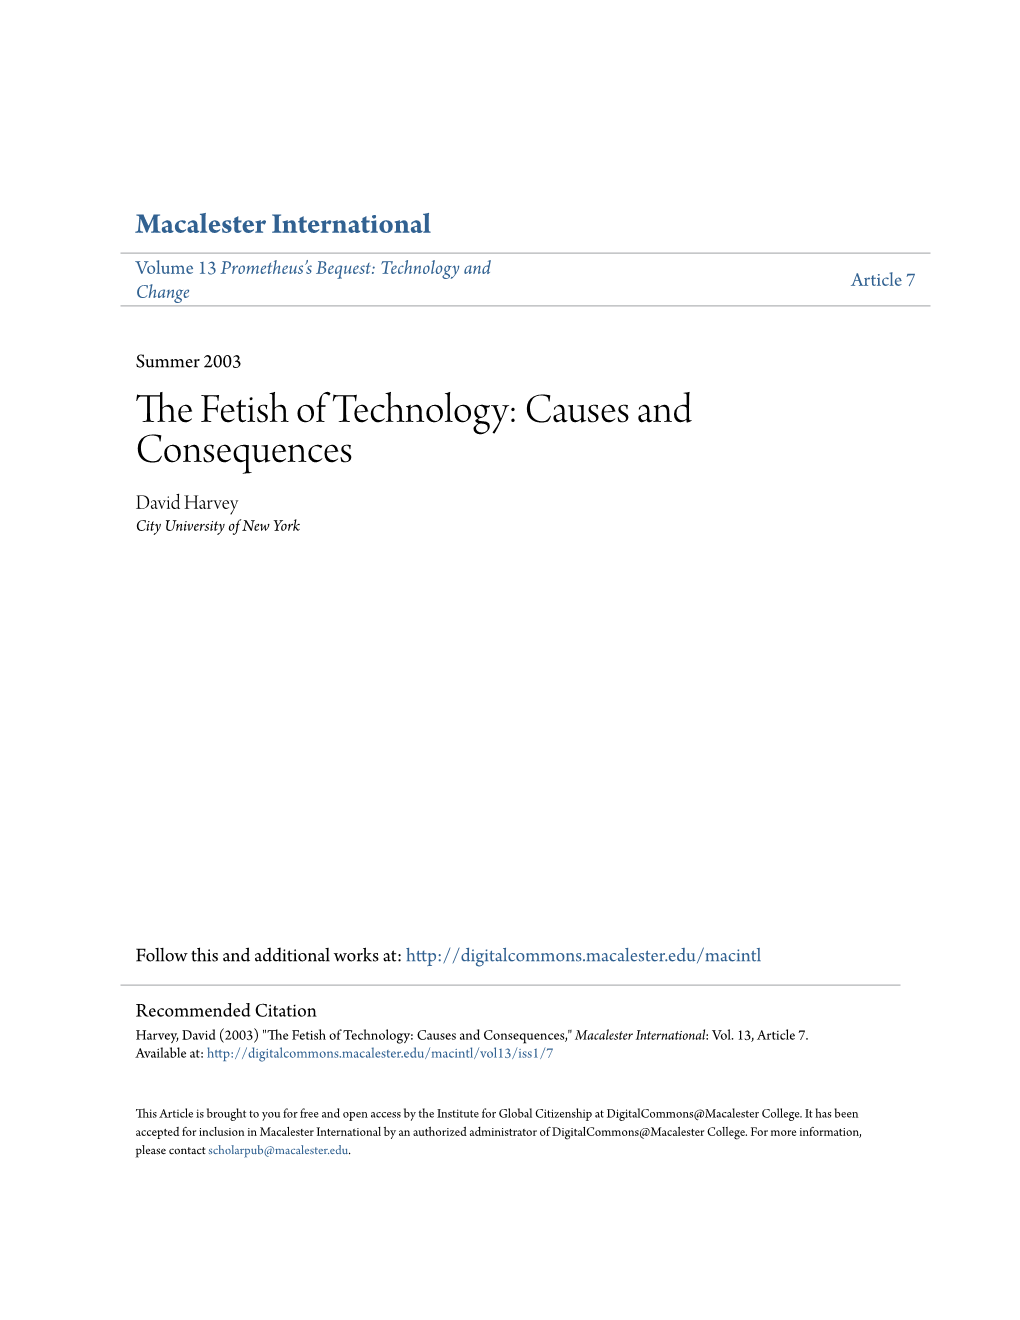 The Fetish of Technology: Causes and Consequences